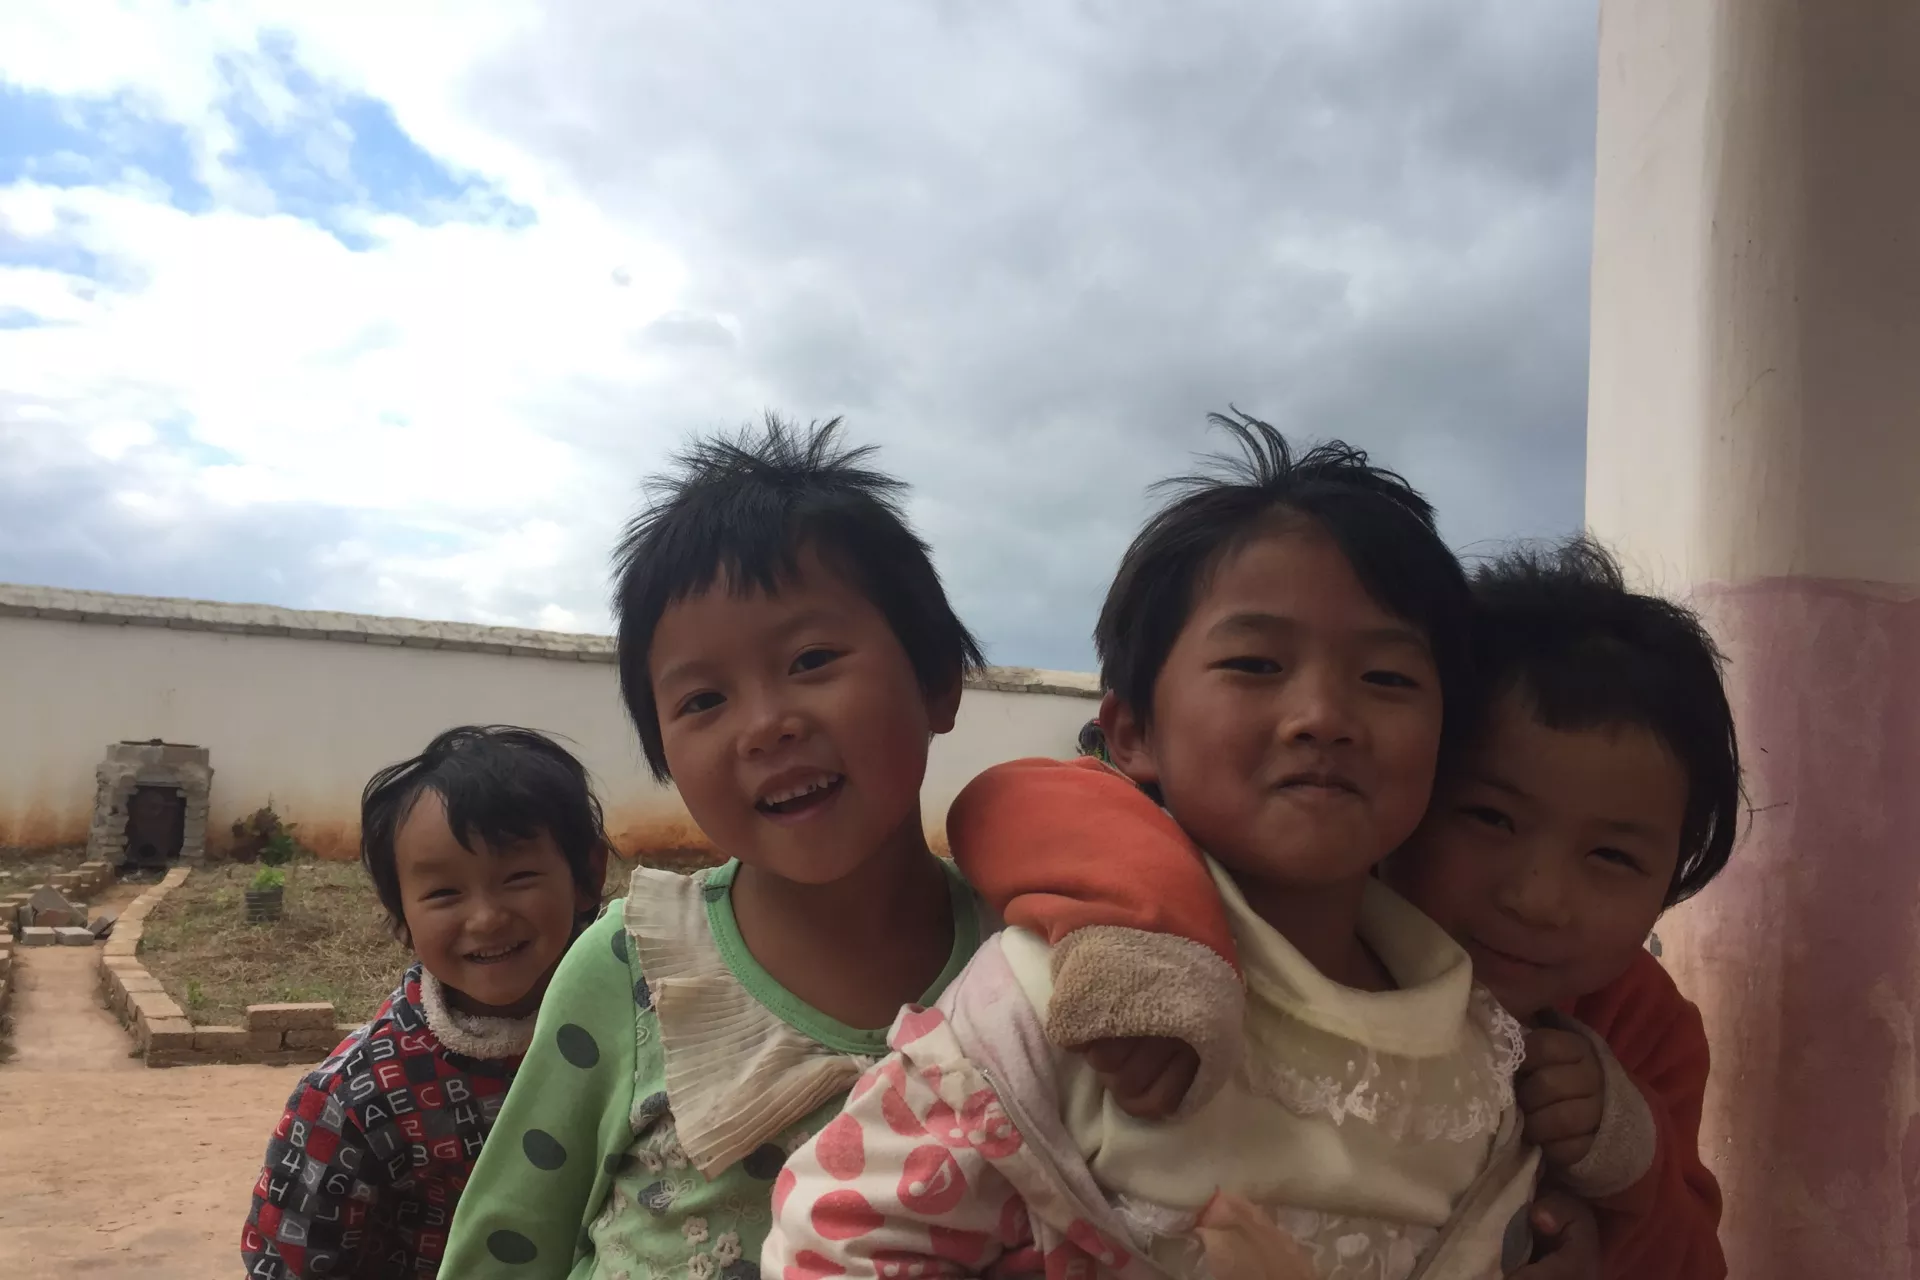 Children at Eyi Kindergarten in Yunnan Province pose for photos.